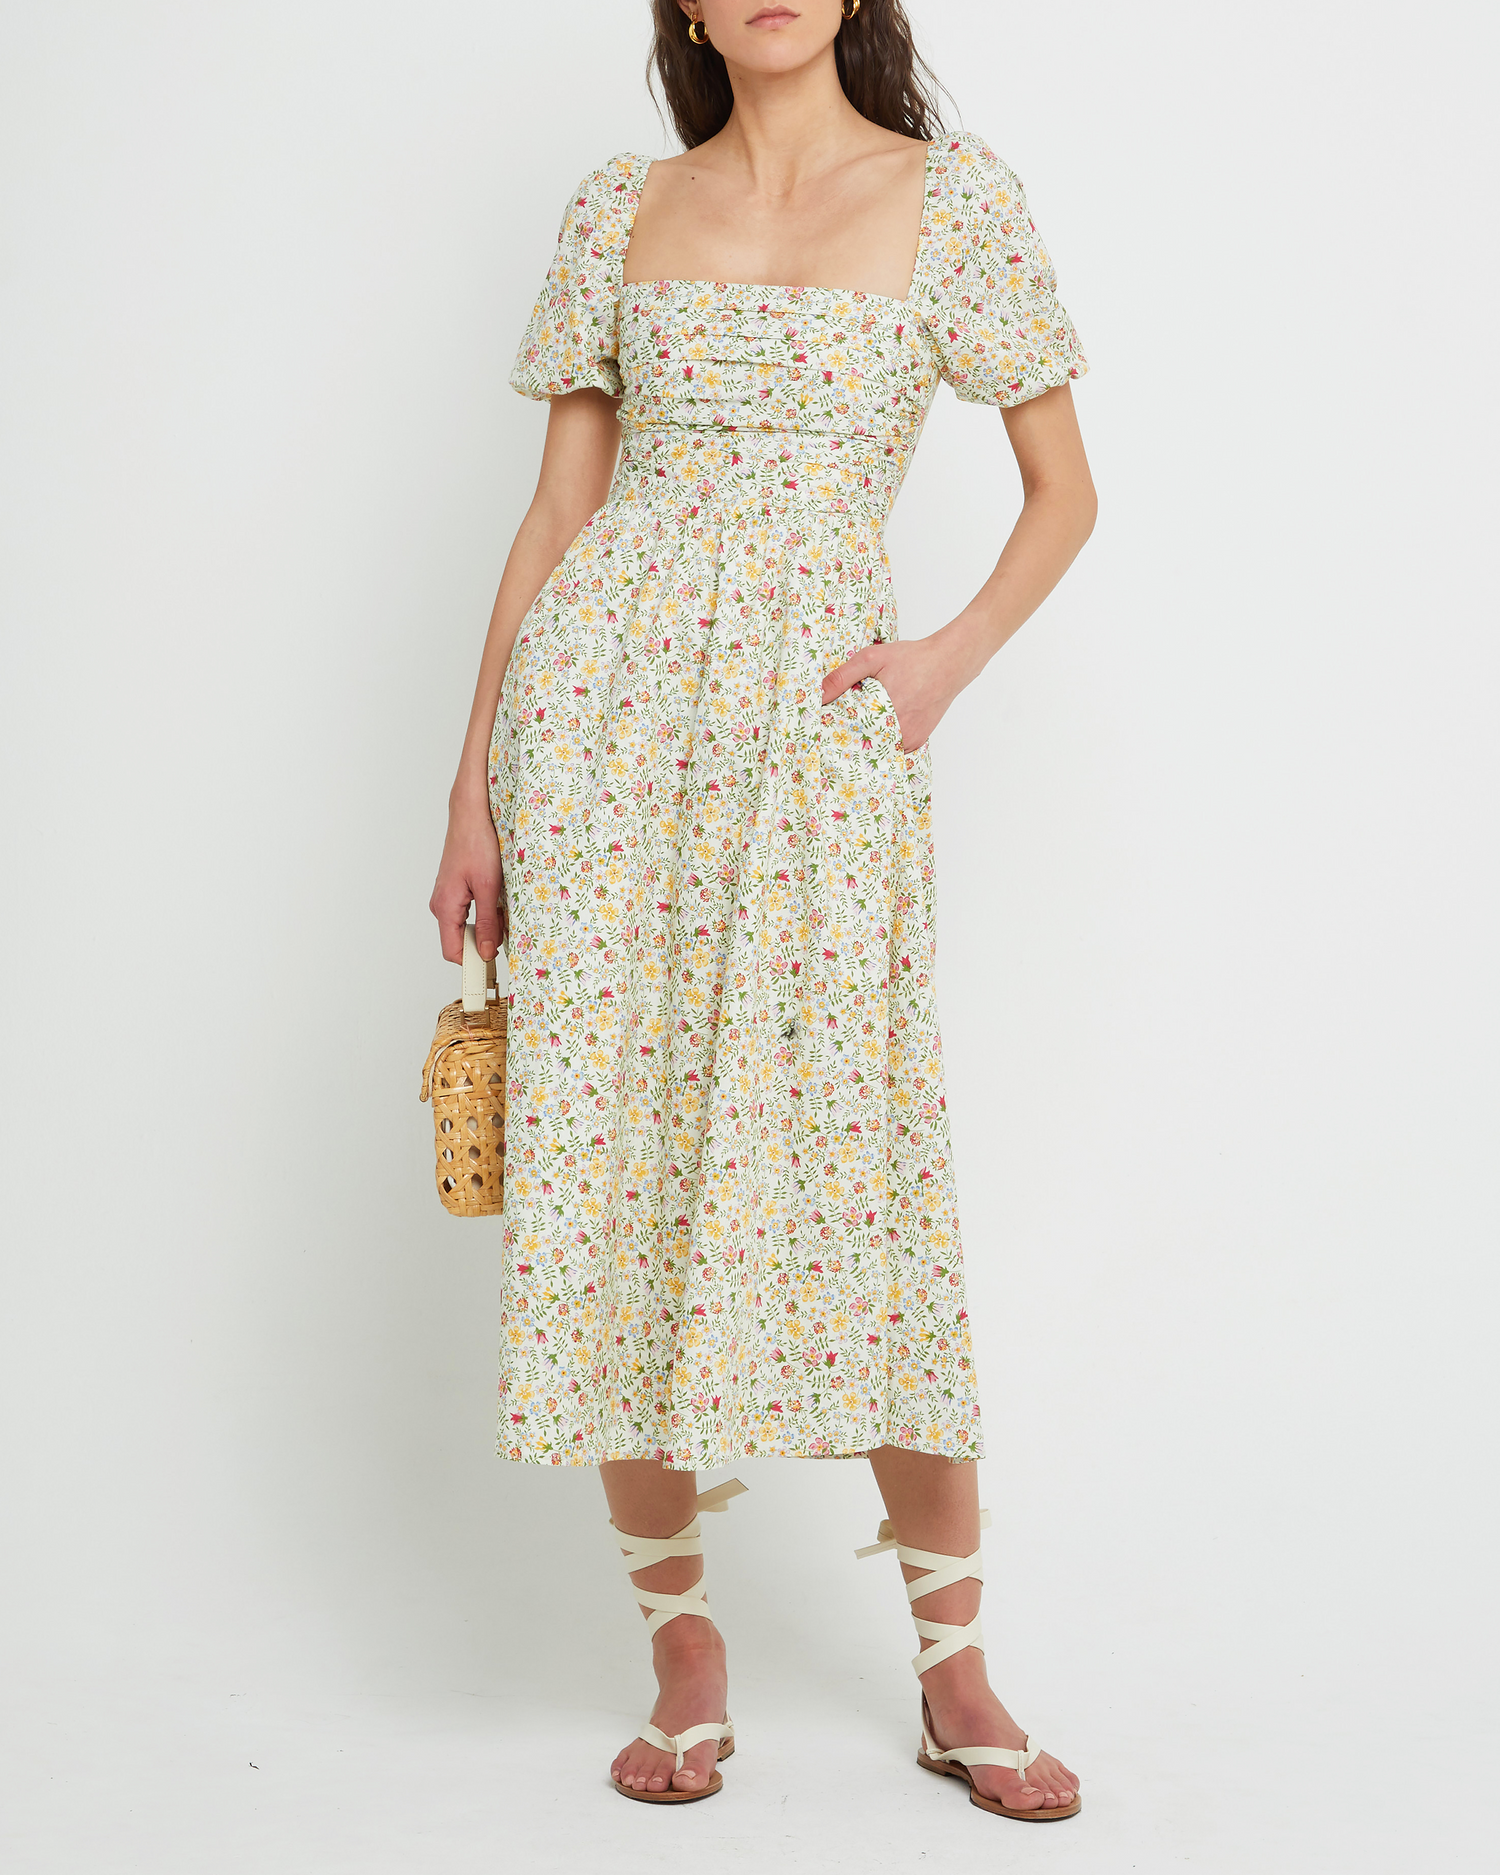 Fourth image of River Dress, a floral midi dress, square neckline, short puff sleeves, gathered bodice